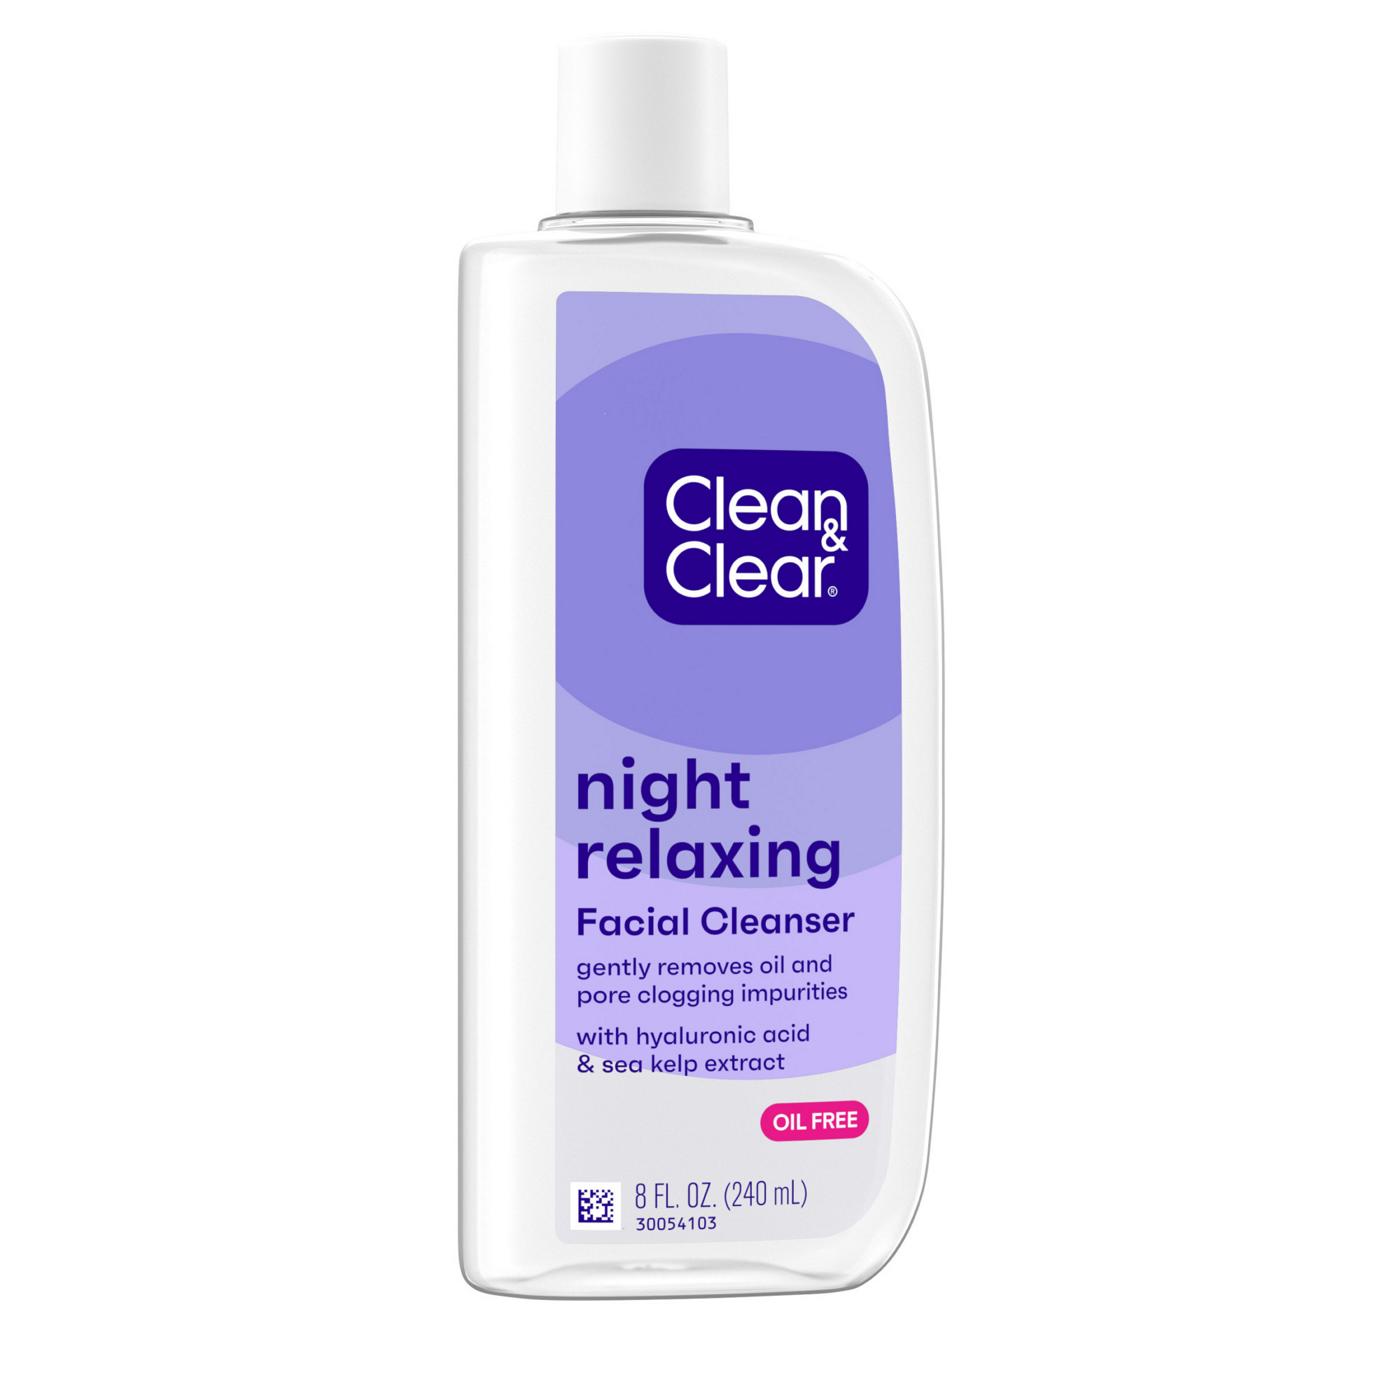 Clean & Clear Night Relaxing Deep Cleaning Face Wash; image 7 of 8